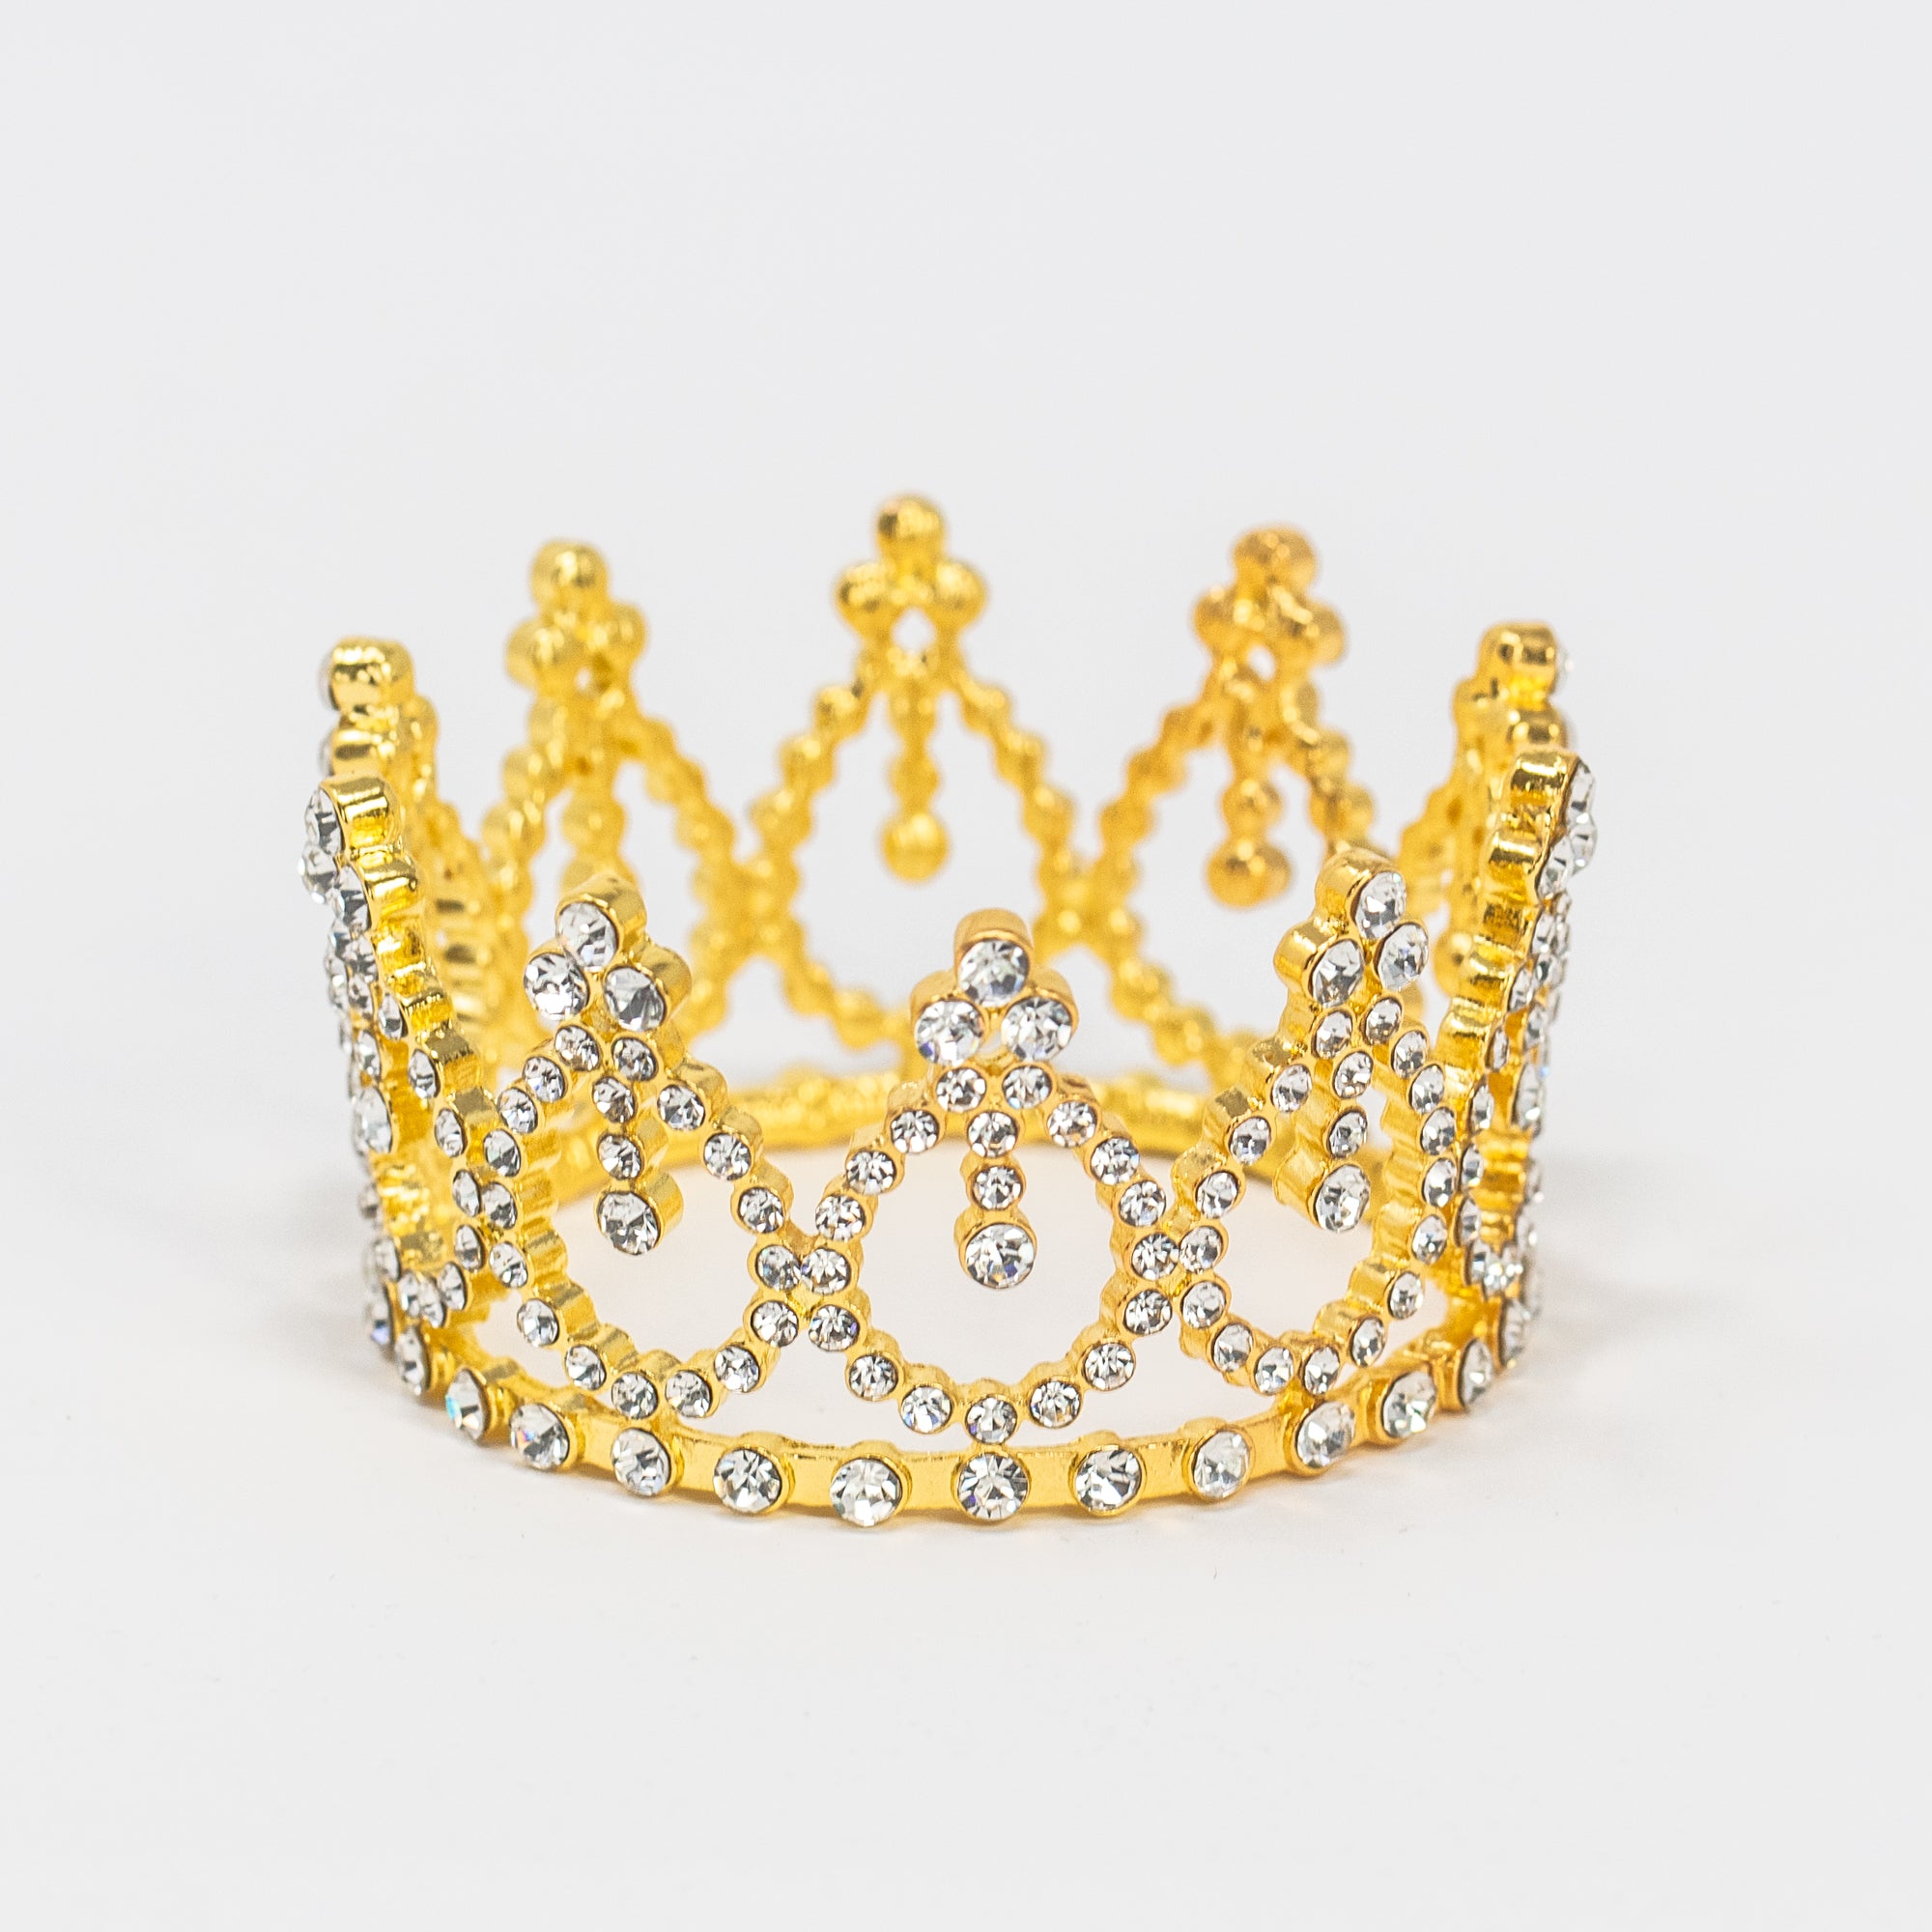 Mini Gold Crown, Multi Function Mini Crowns For Craft 